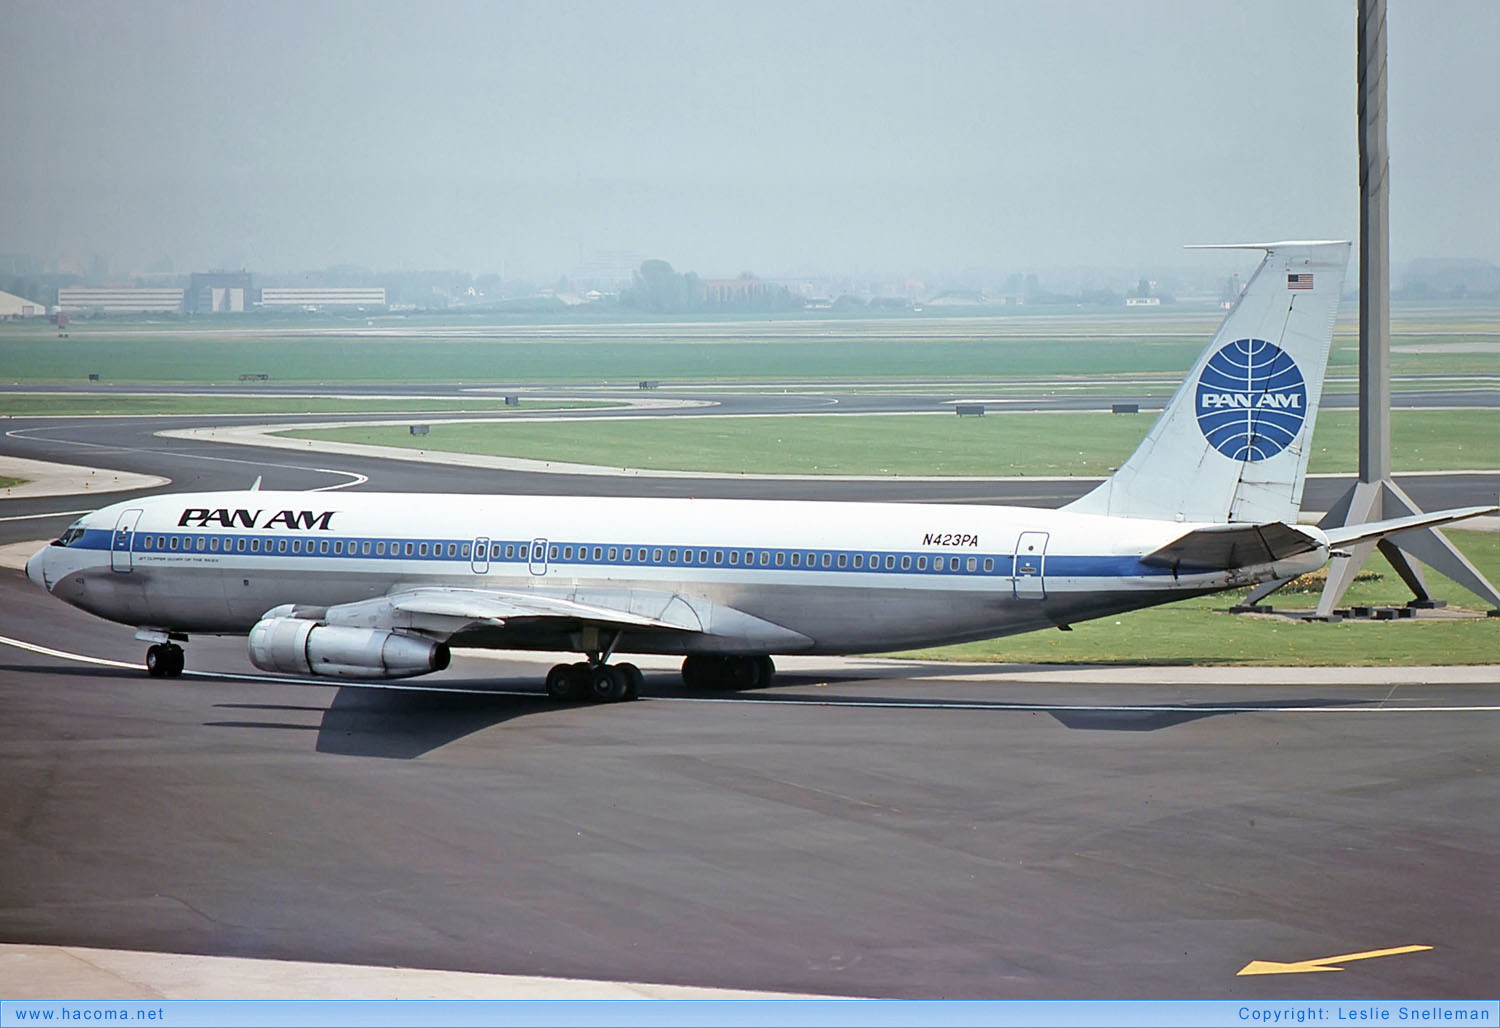 Photo of N423PA - Pan Am Clipper Glory of the Skies - Amsterdam Airport Schiphol - May 8, 1976